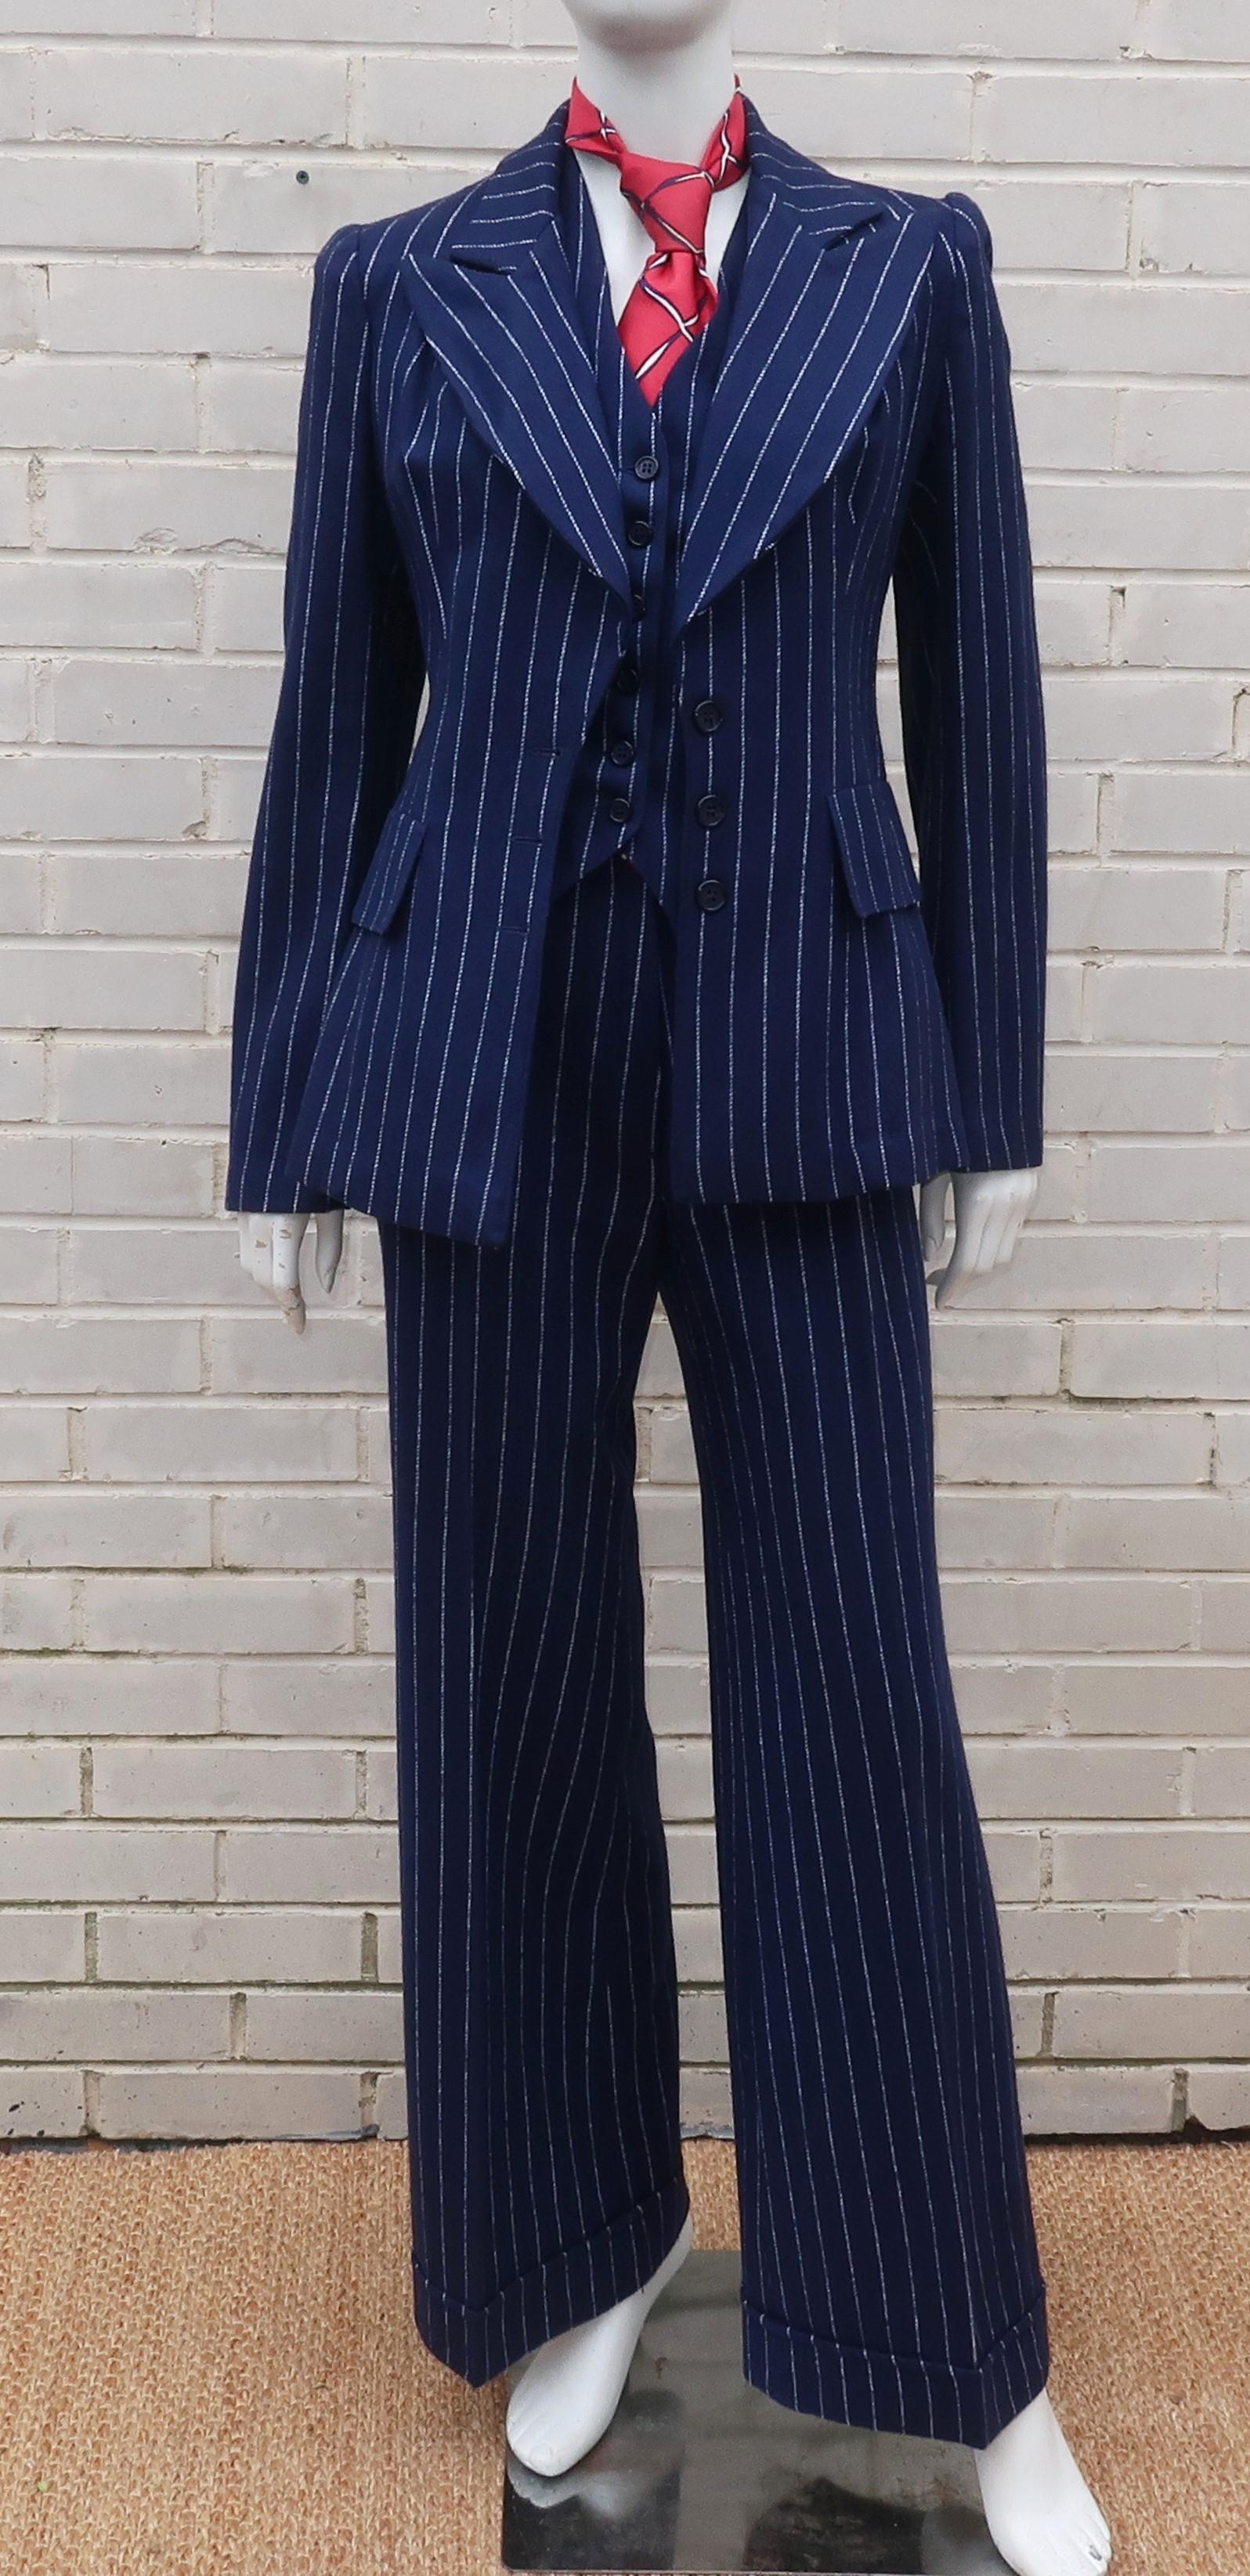 This C.1970 Stirling Cooper three piece wool suit takes you straight back to the swinging London scene of the late 1960’s ... the era of fashionable rockers, Biba and the androgynous look.  The period perfect mod details include a wide lapel, pointy